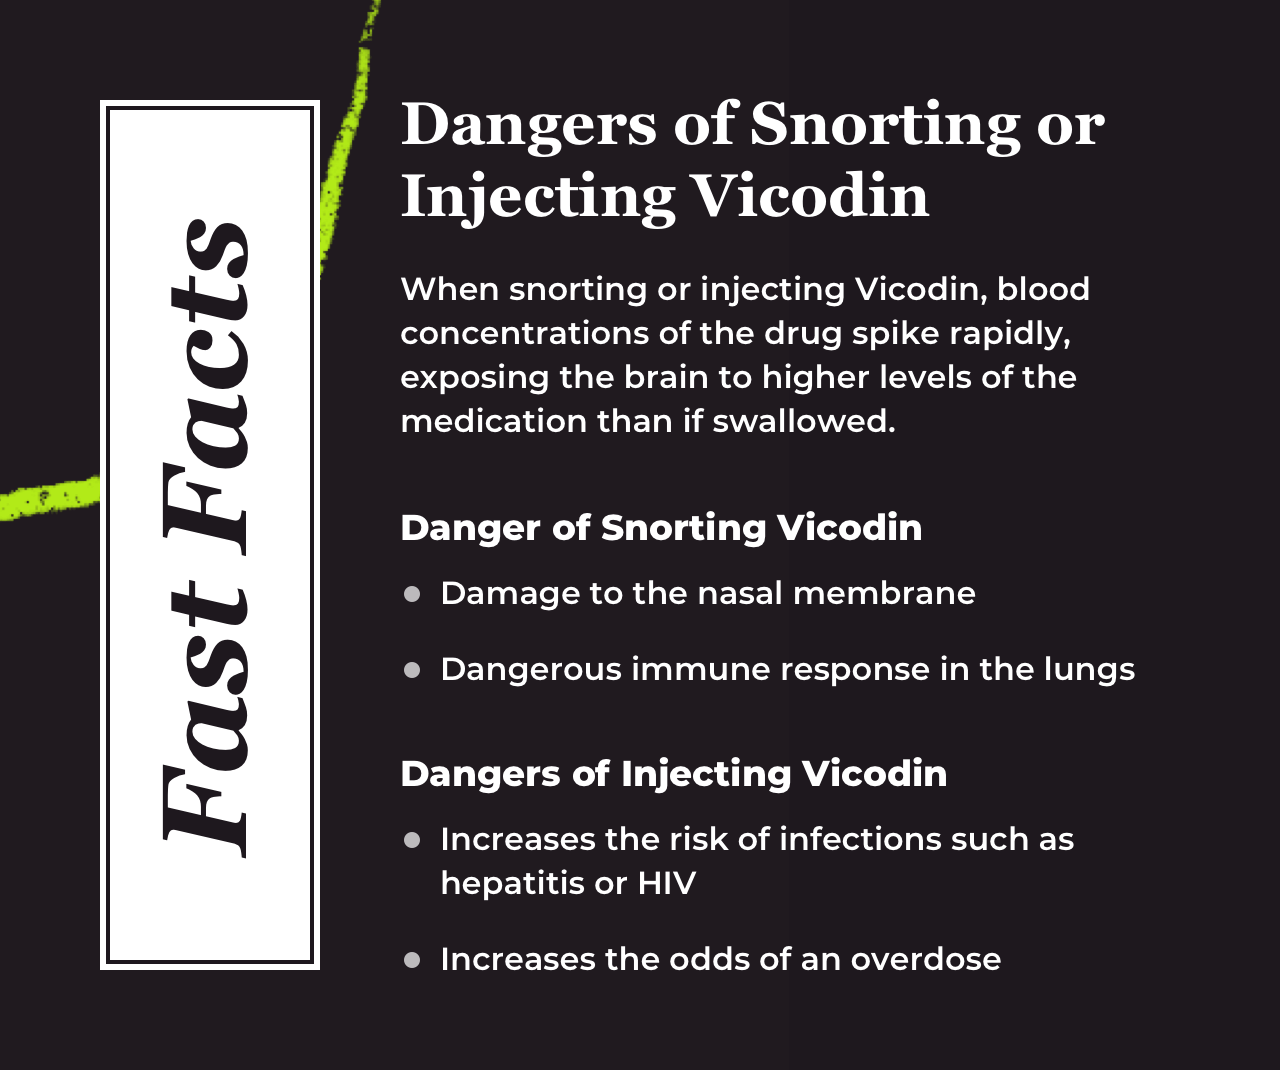 Dangers of Snorting or Injecting Vicodin